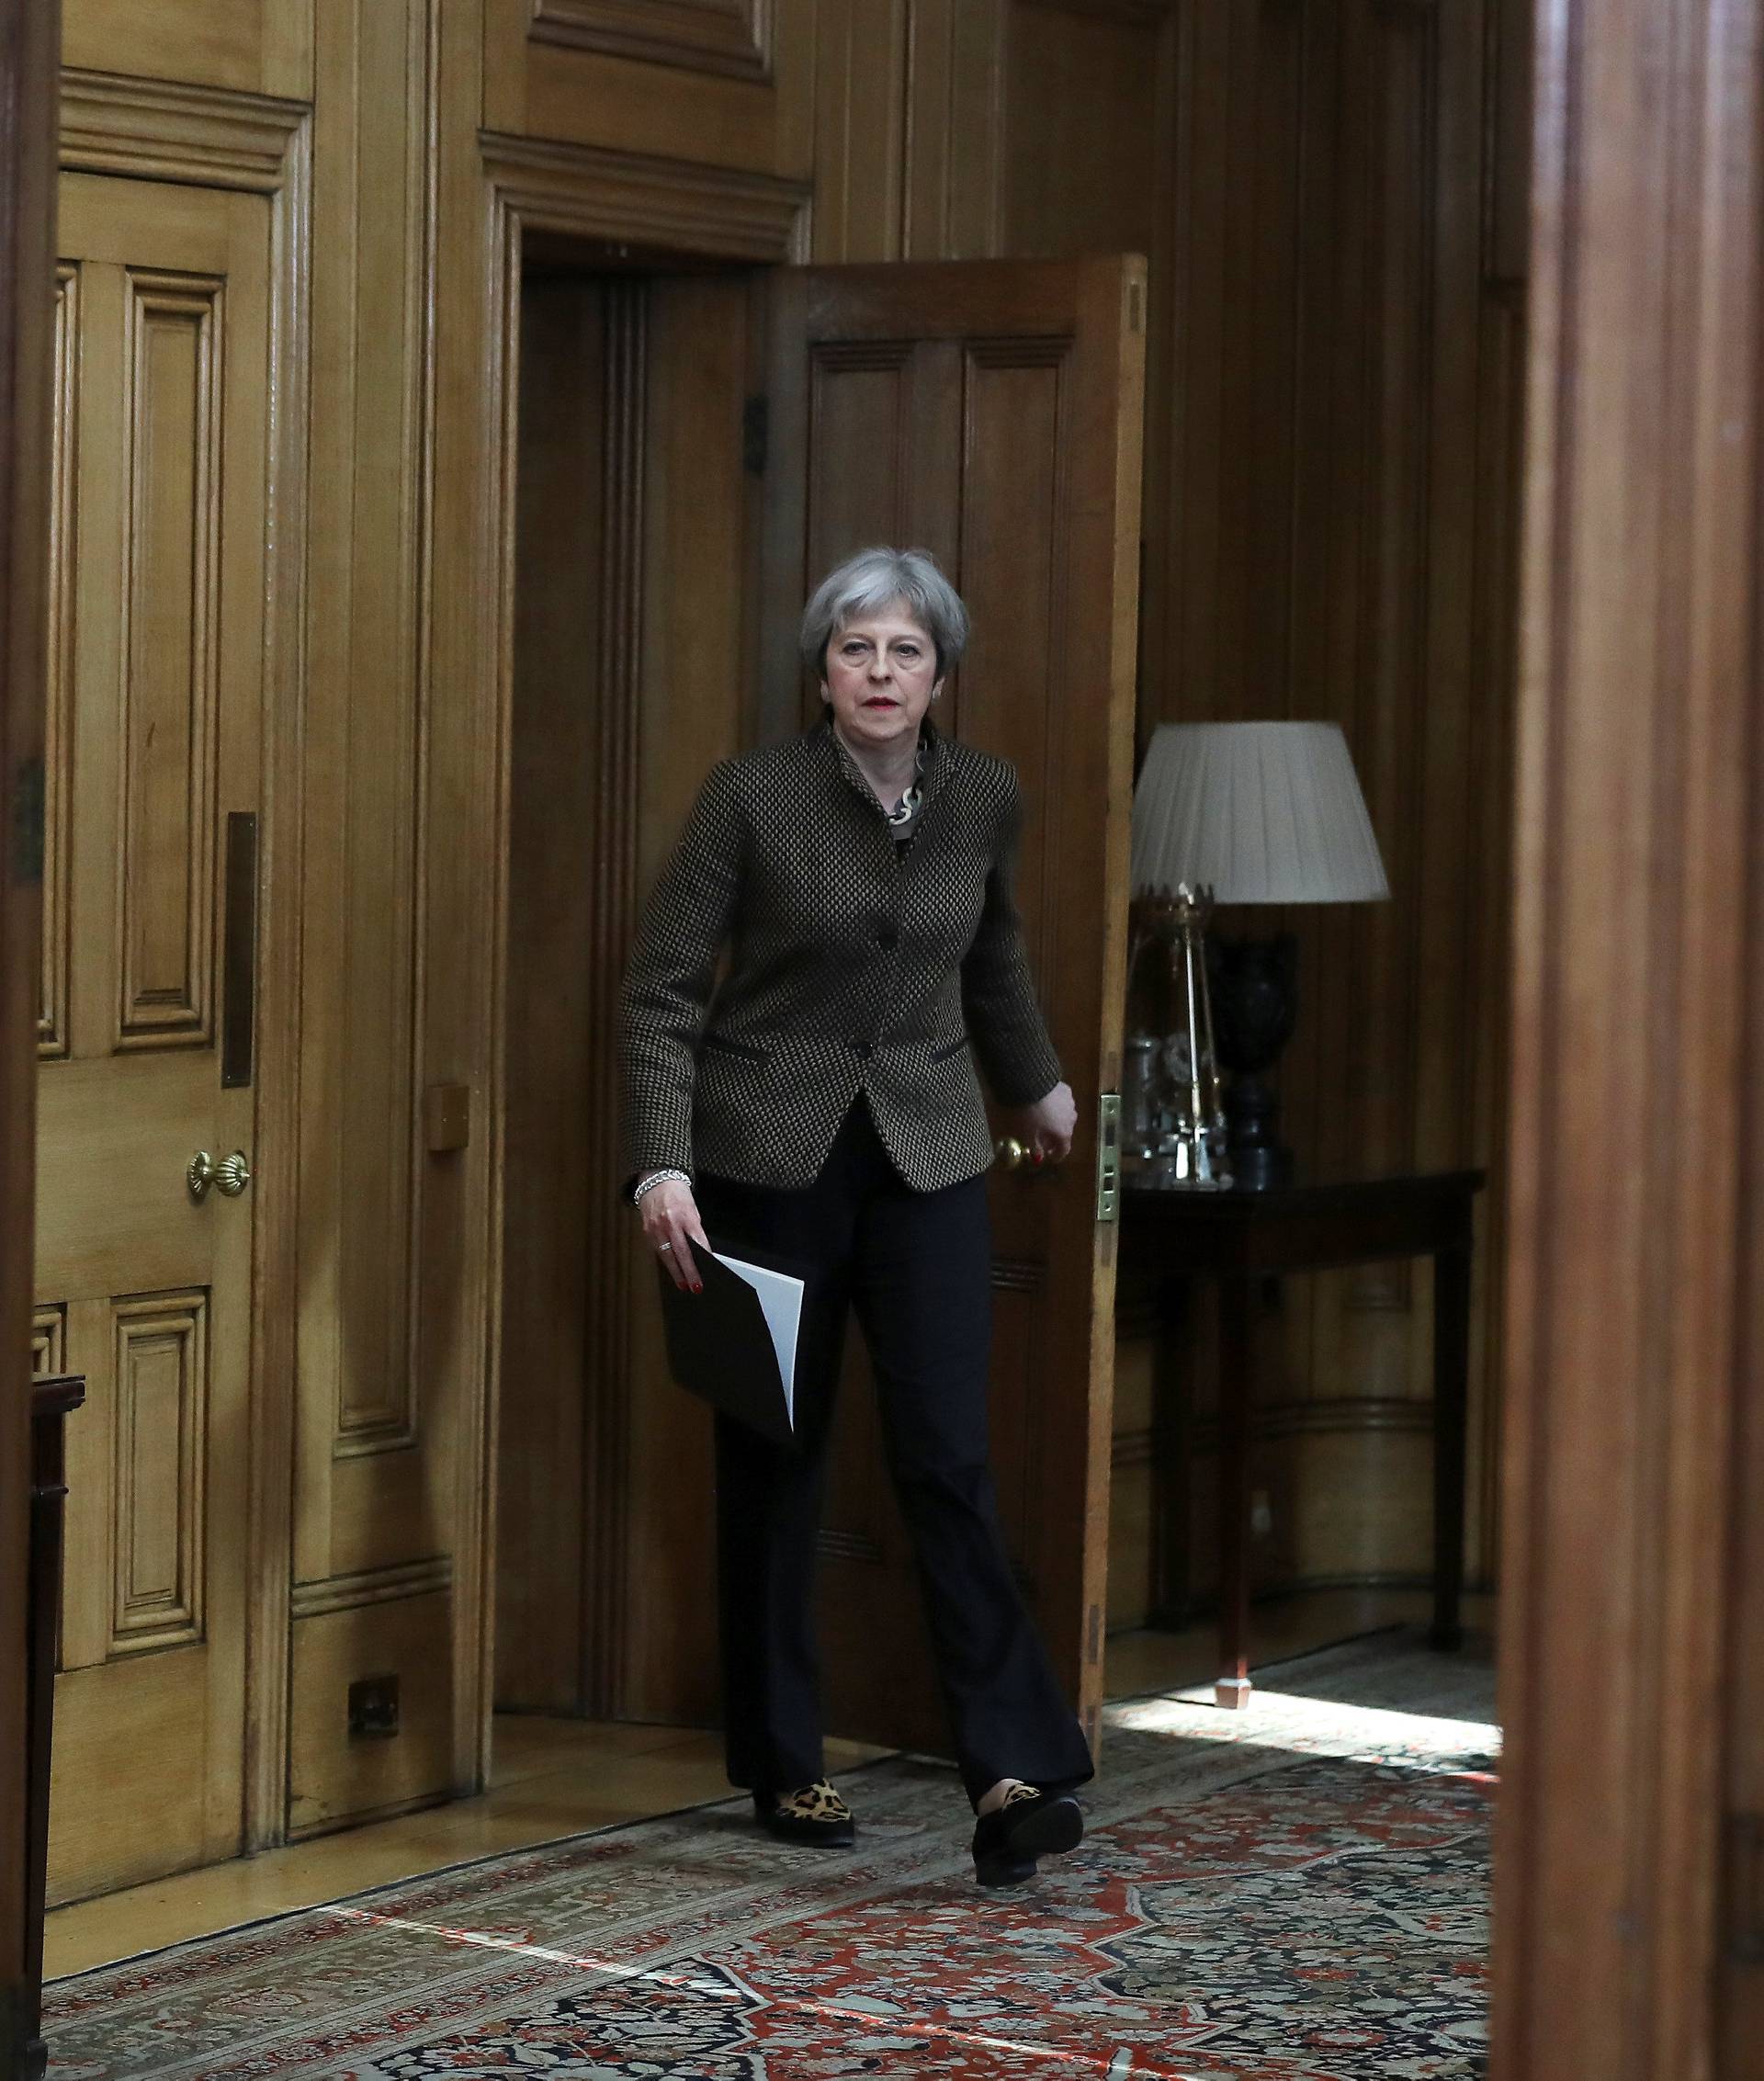 Britain's Prime Minister Theresa May attends a press conference in 10 Downing Street, London